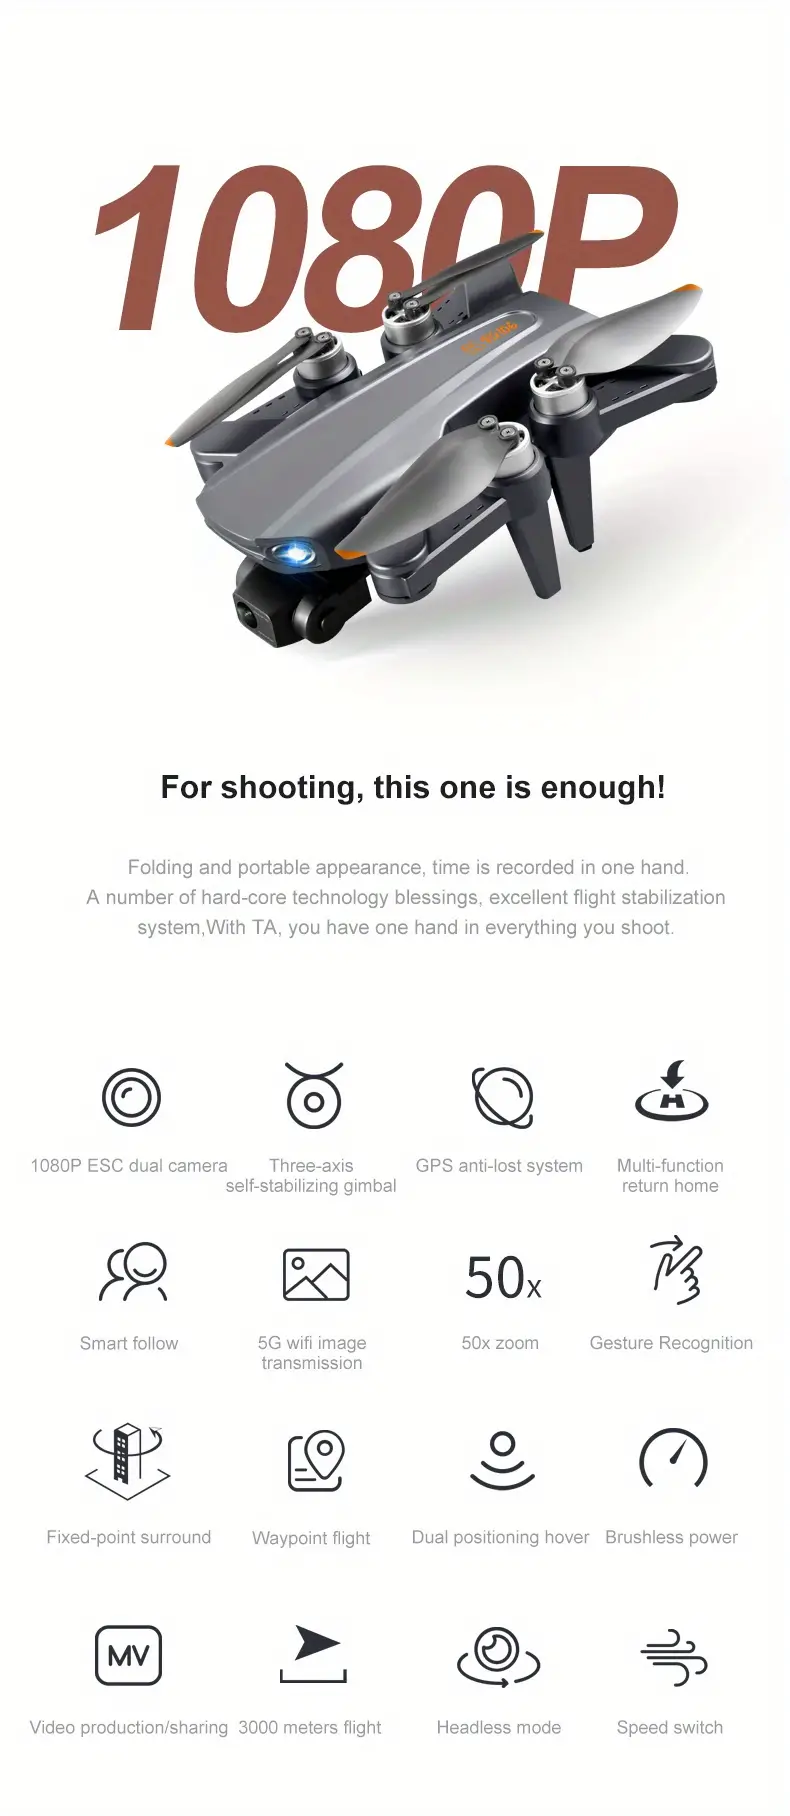 rg106 5g professional brushless gps drone three axis mechanical gimbal camera 1km image transmission 360 obstacle avoidance one key return flight for about 25 30 minutes details 1